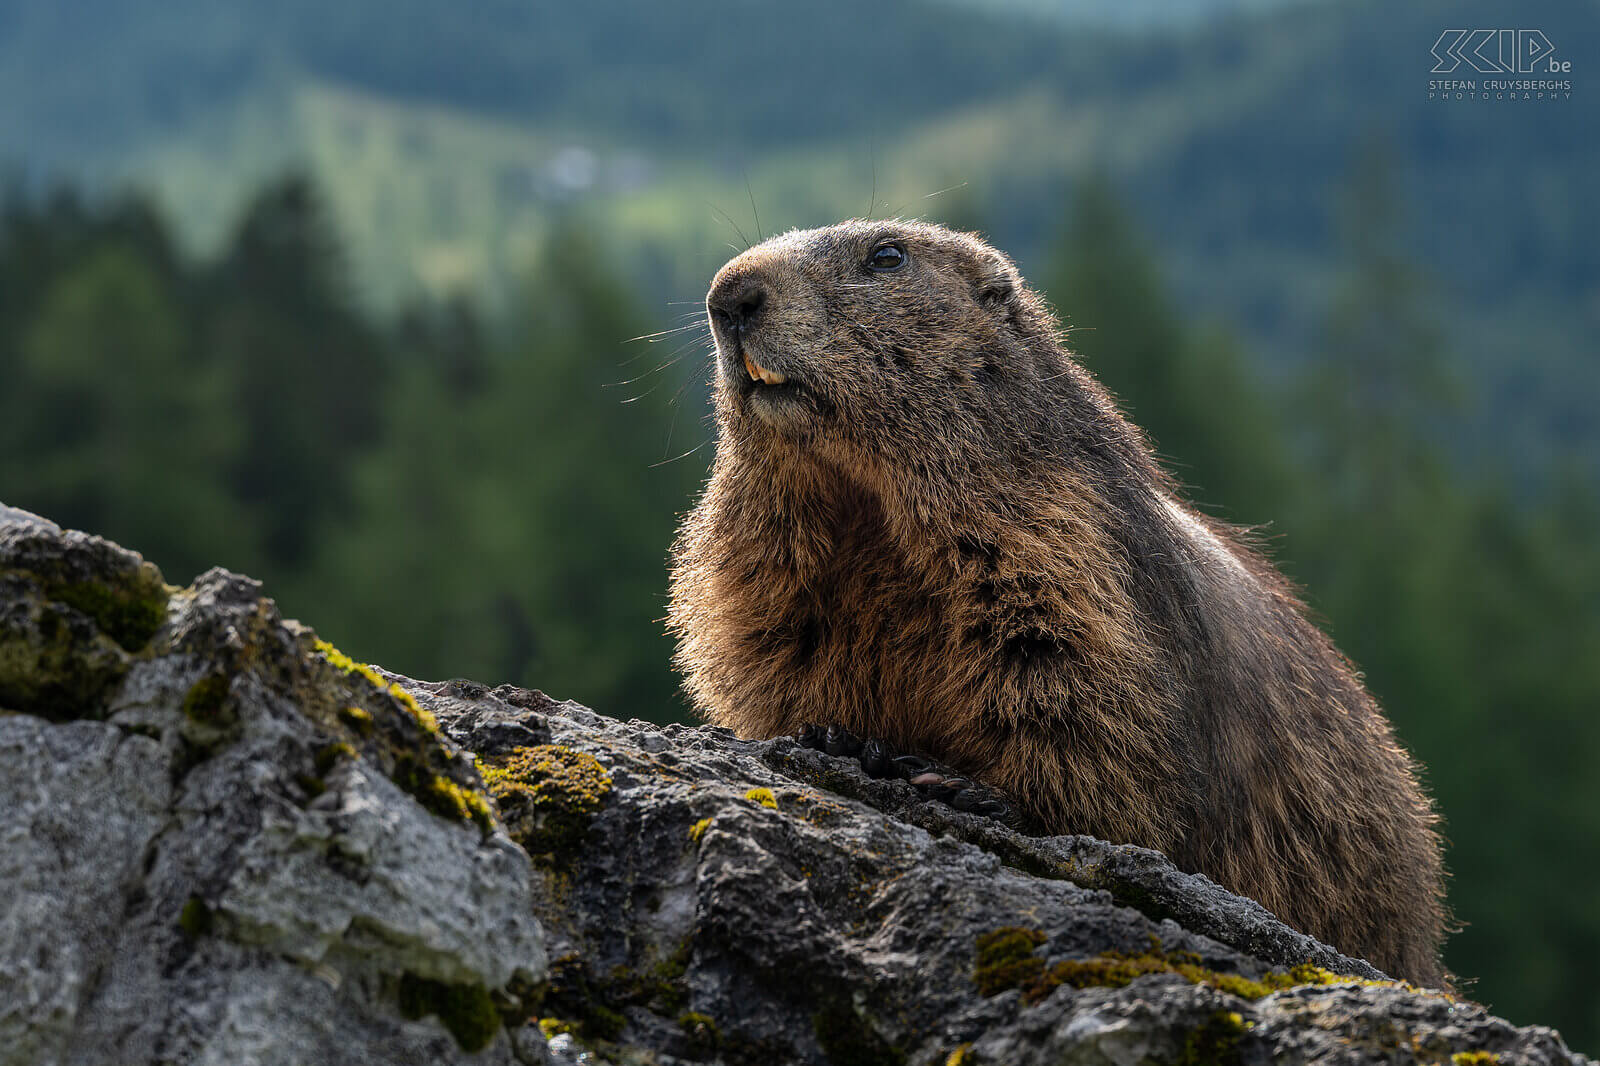 Bachalm - Alpine marmot Close-up of an alpine marmot (Marmota marmota). The alpine marmot feeds on grasses, herbs and sometimes it also eats flowers, unripe fruits and roots. It is a diurnal animal that lives in a family group in a deep, extensive tunnel system, a castle. Stefan Cruysberghs